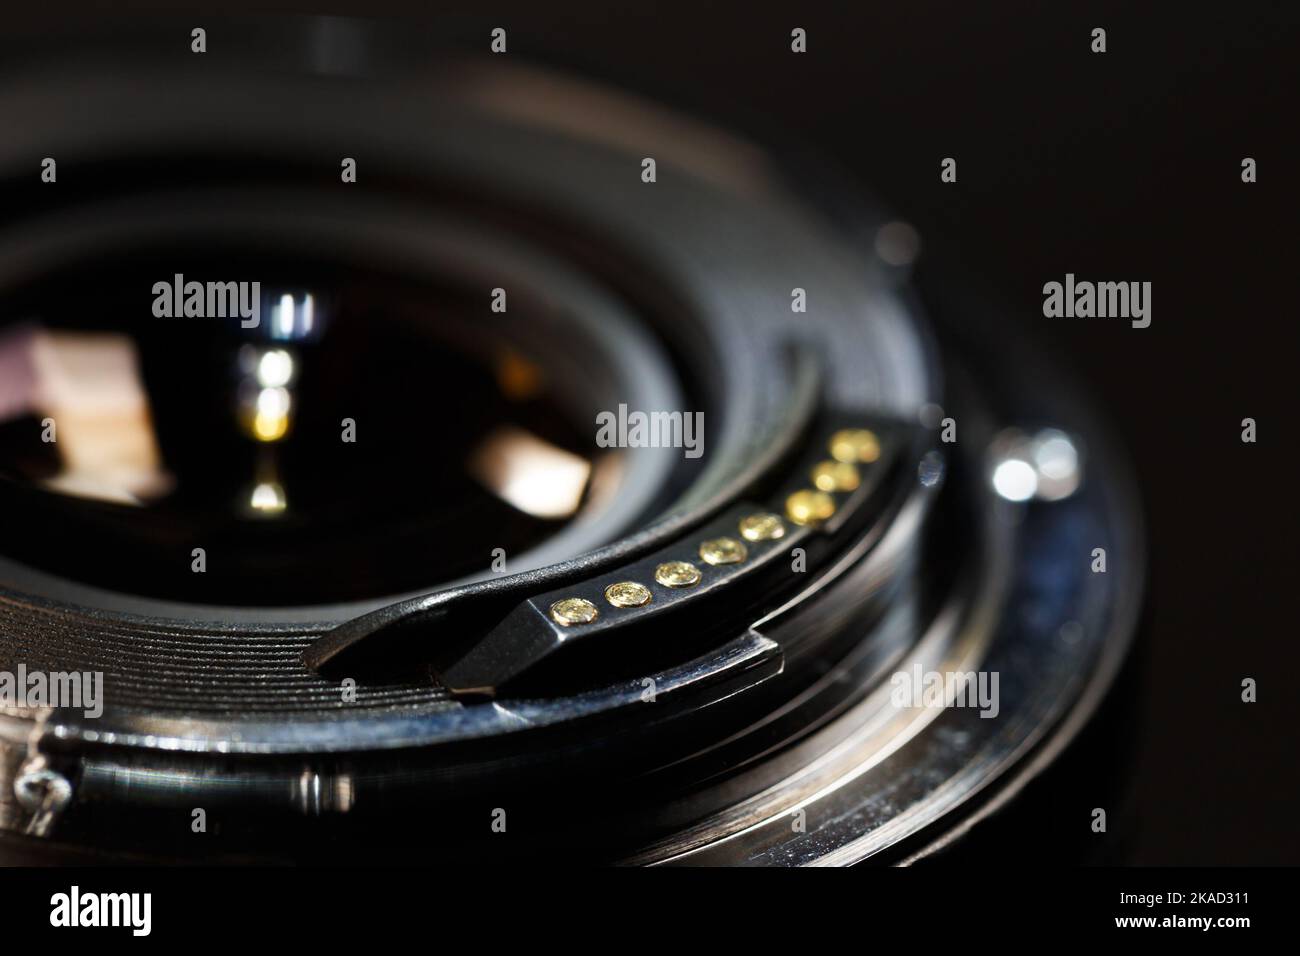 The reverse side of a modern lens with contacts on the bayonet. Macro photography against a dark background with shallow depth of field Stock Photo